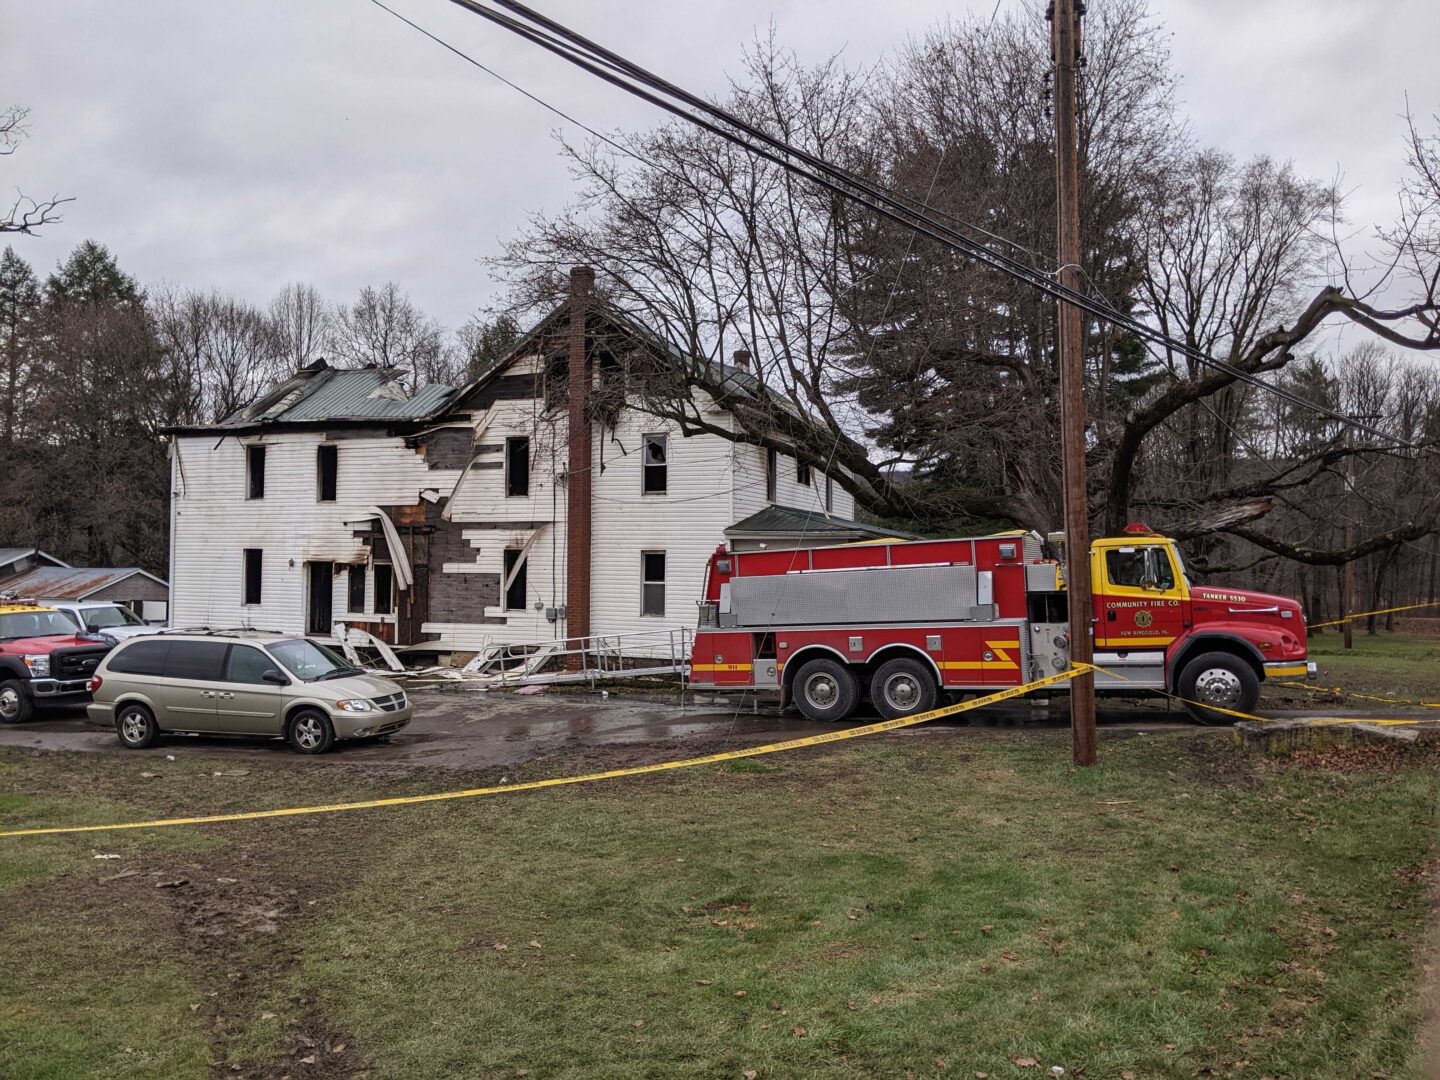 The scene of the fatal fire in West Penn Township, Schuylkill County.
